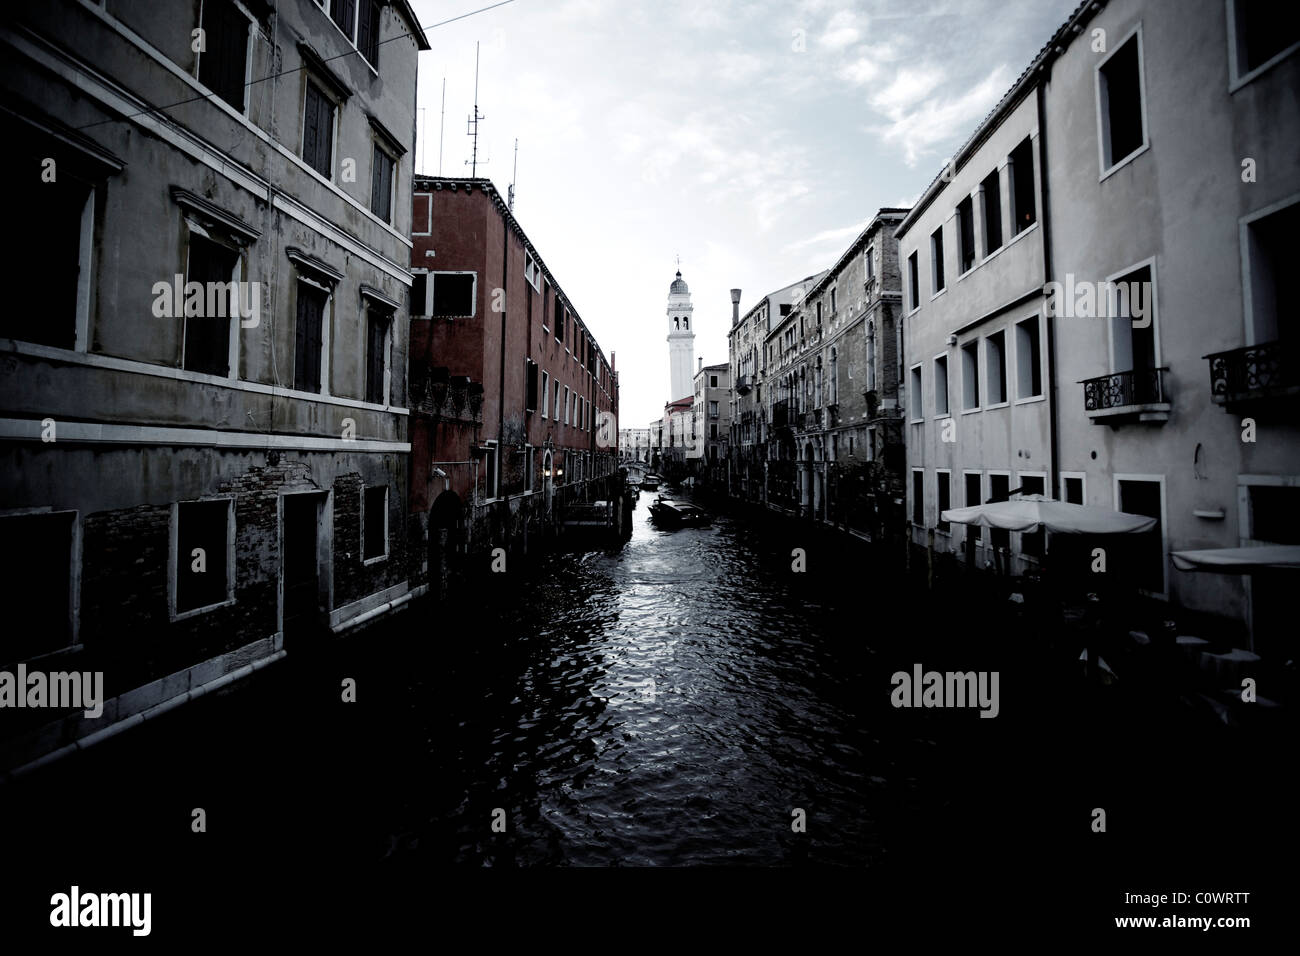 A venetian waterway in Venice Italy with a motorboat taxi commuting on it. Stock Photo